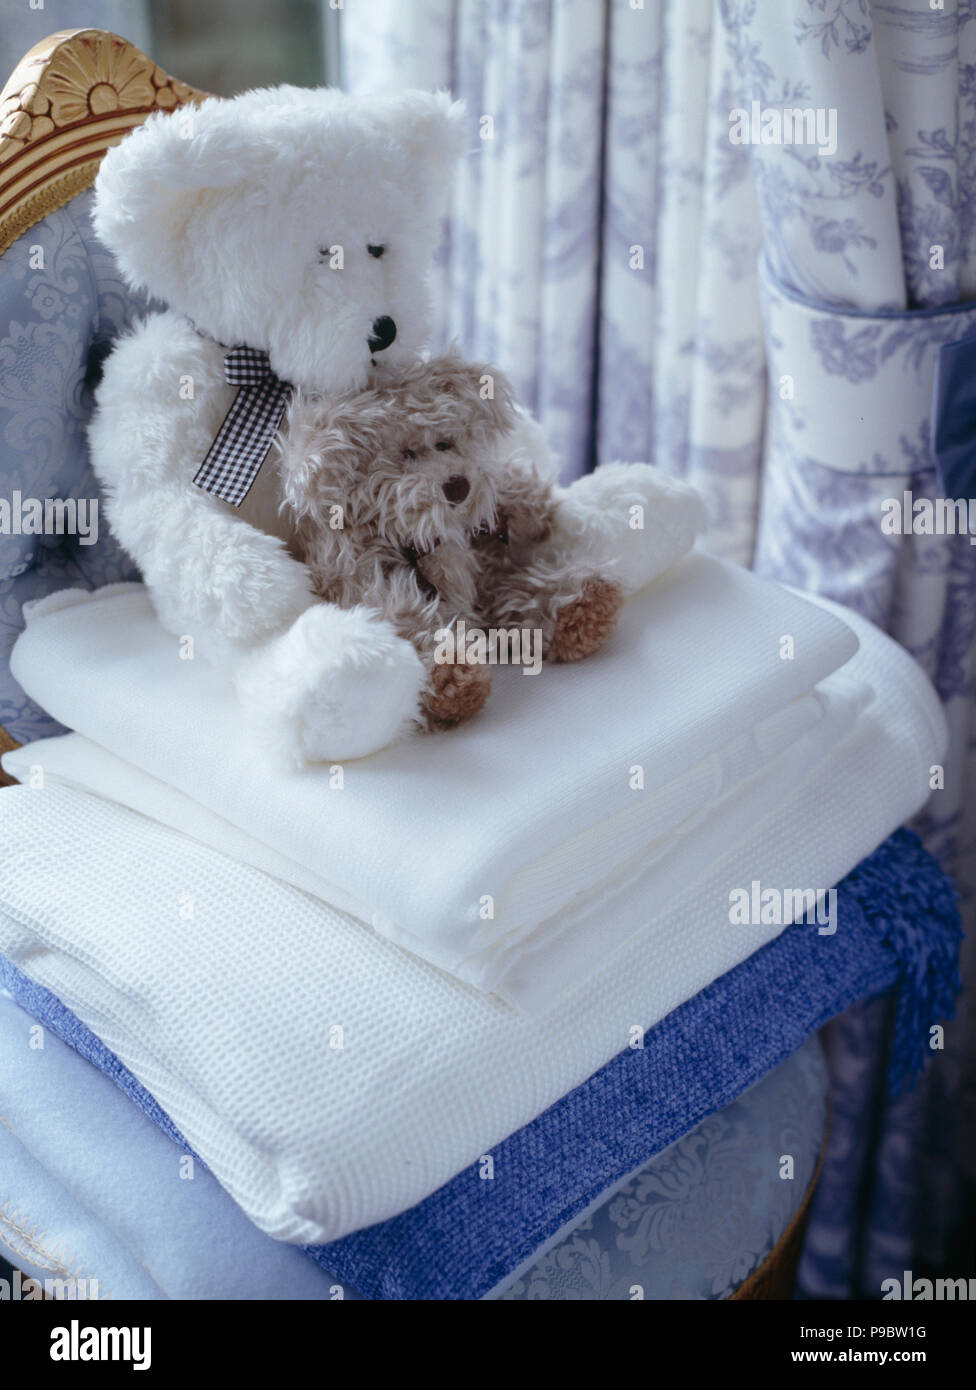 Close-up of teddybears on pile of white blankets Stock Photo